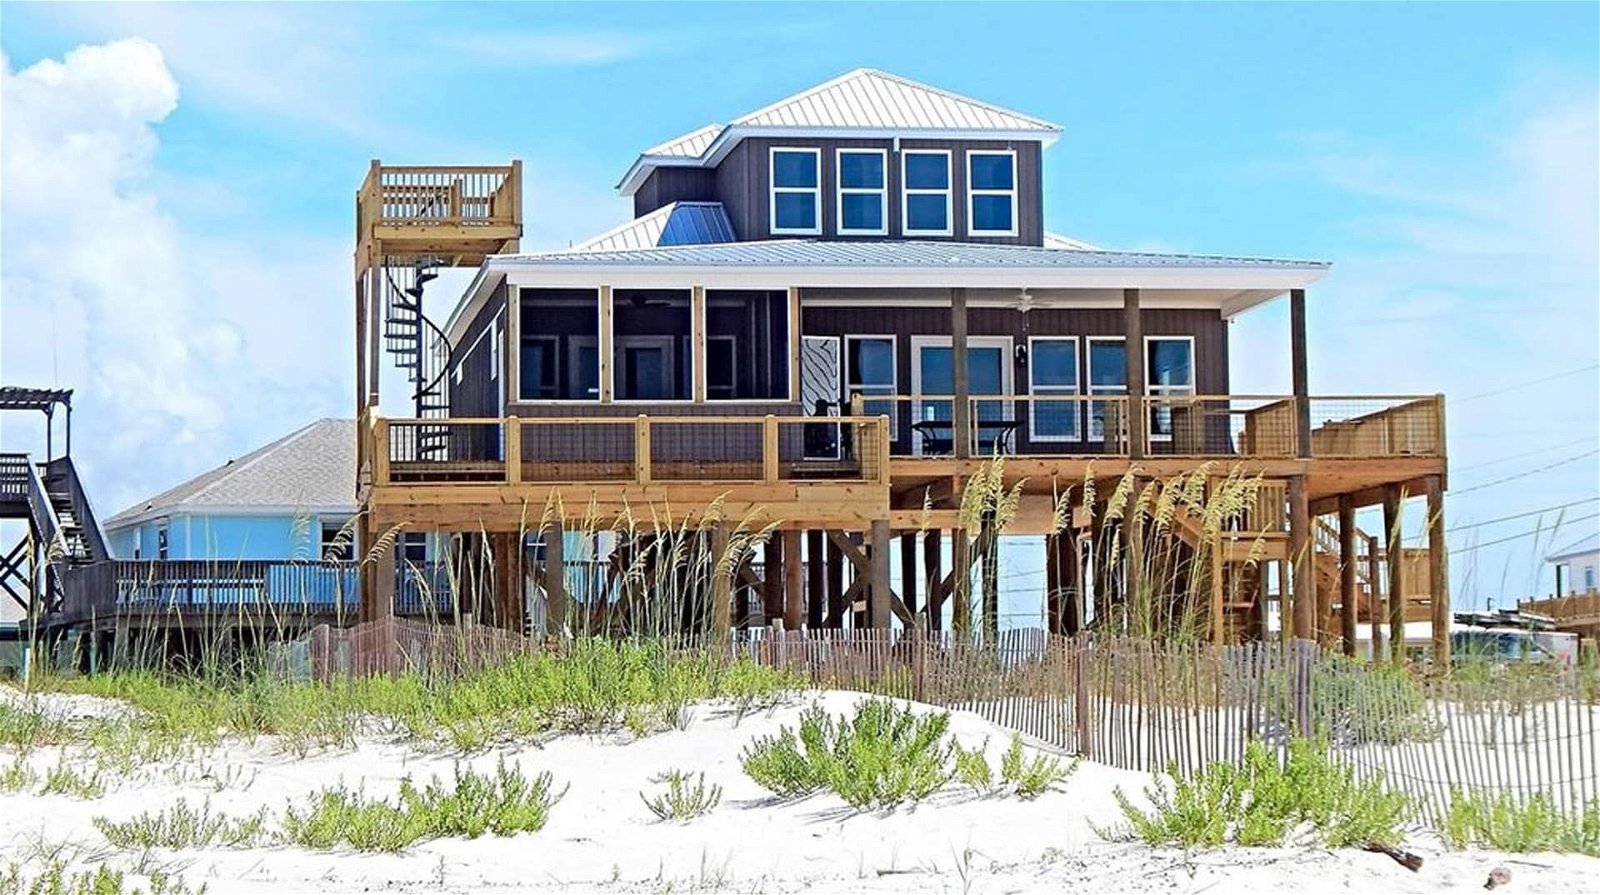 st. augustine new construction mortgage, st. augustine beach new construction mortgage, new construction mortgage st. augustine, st. augustine mortgage